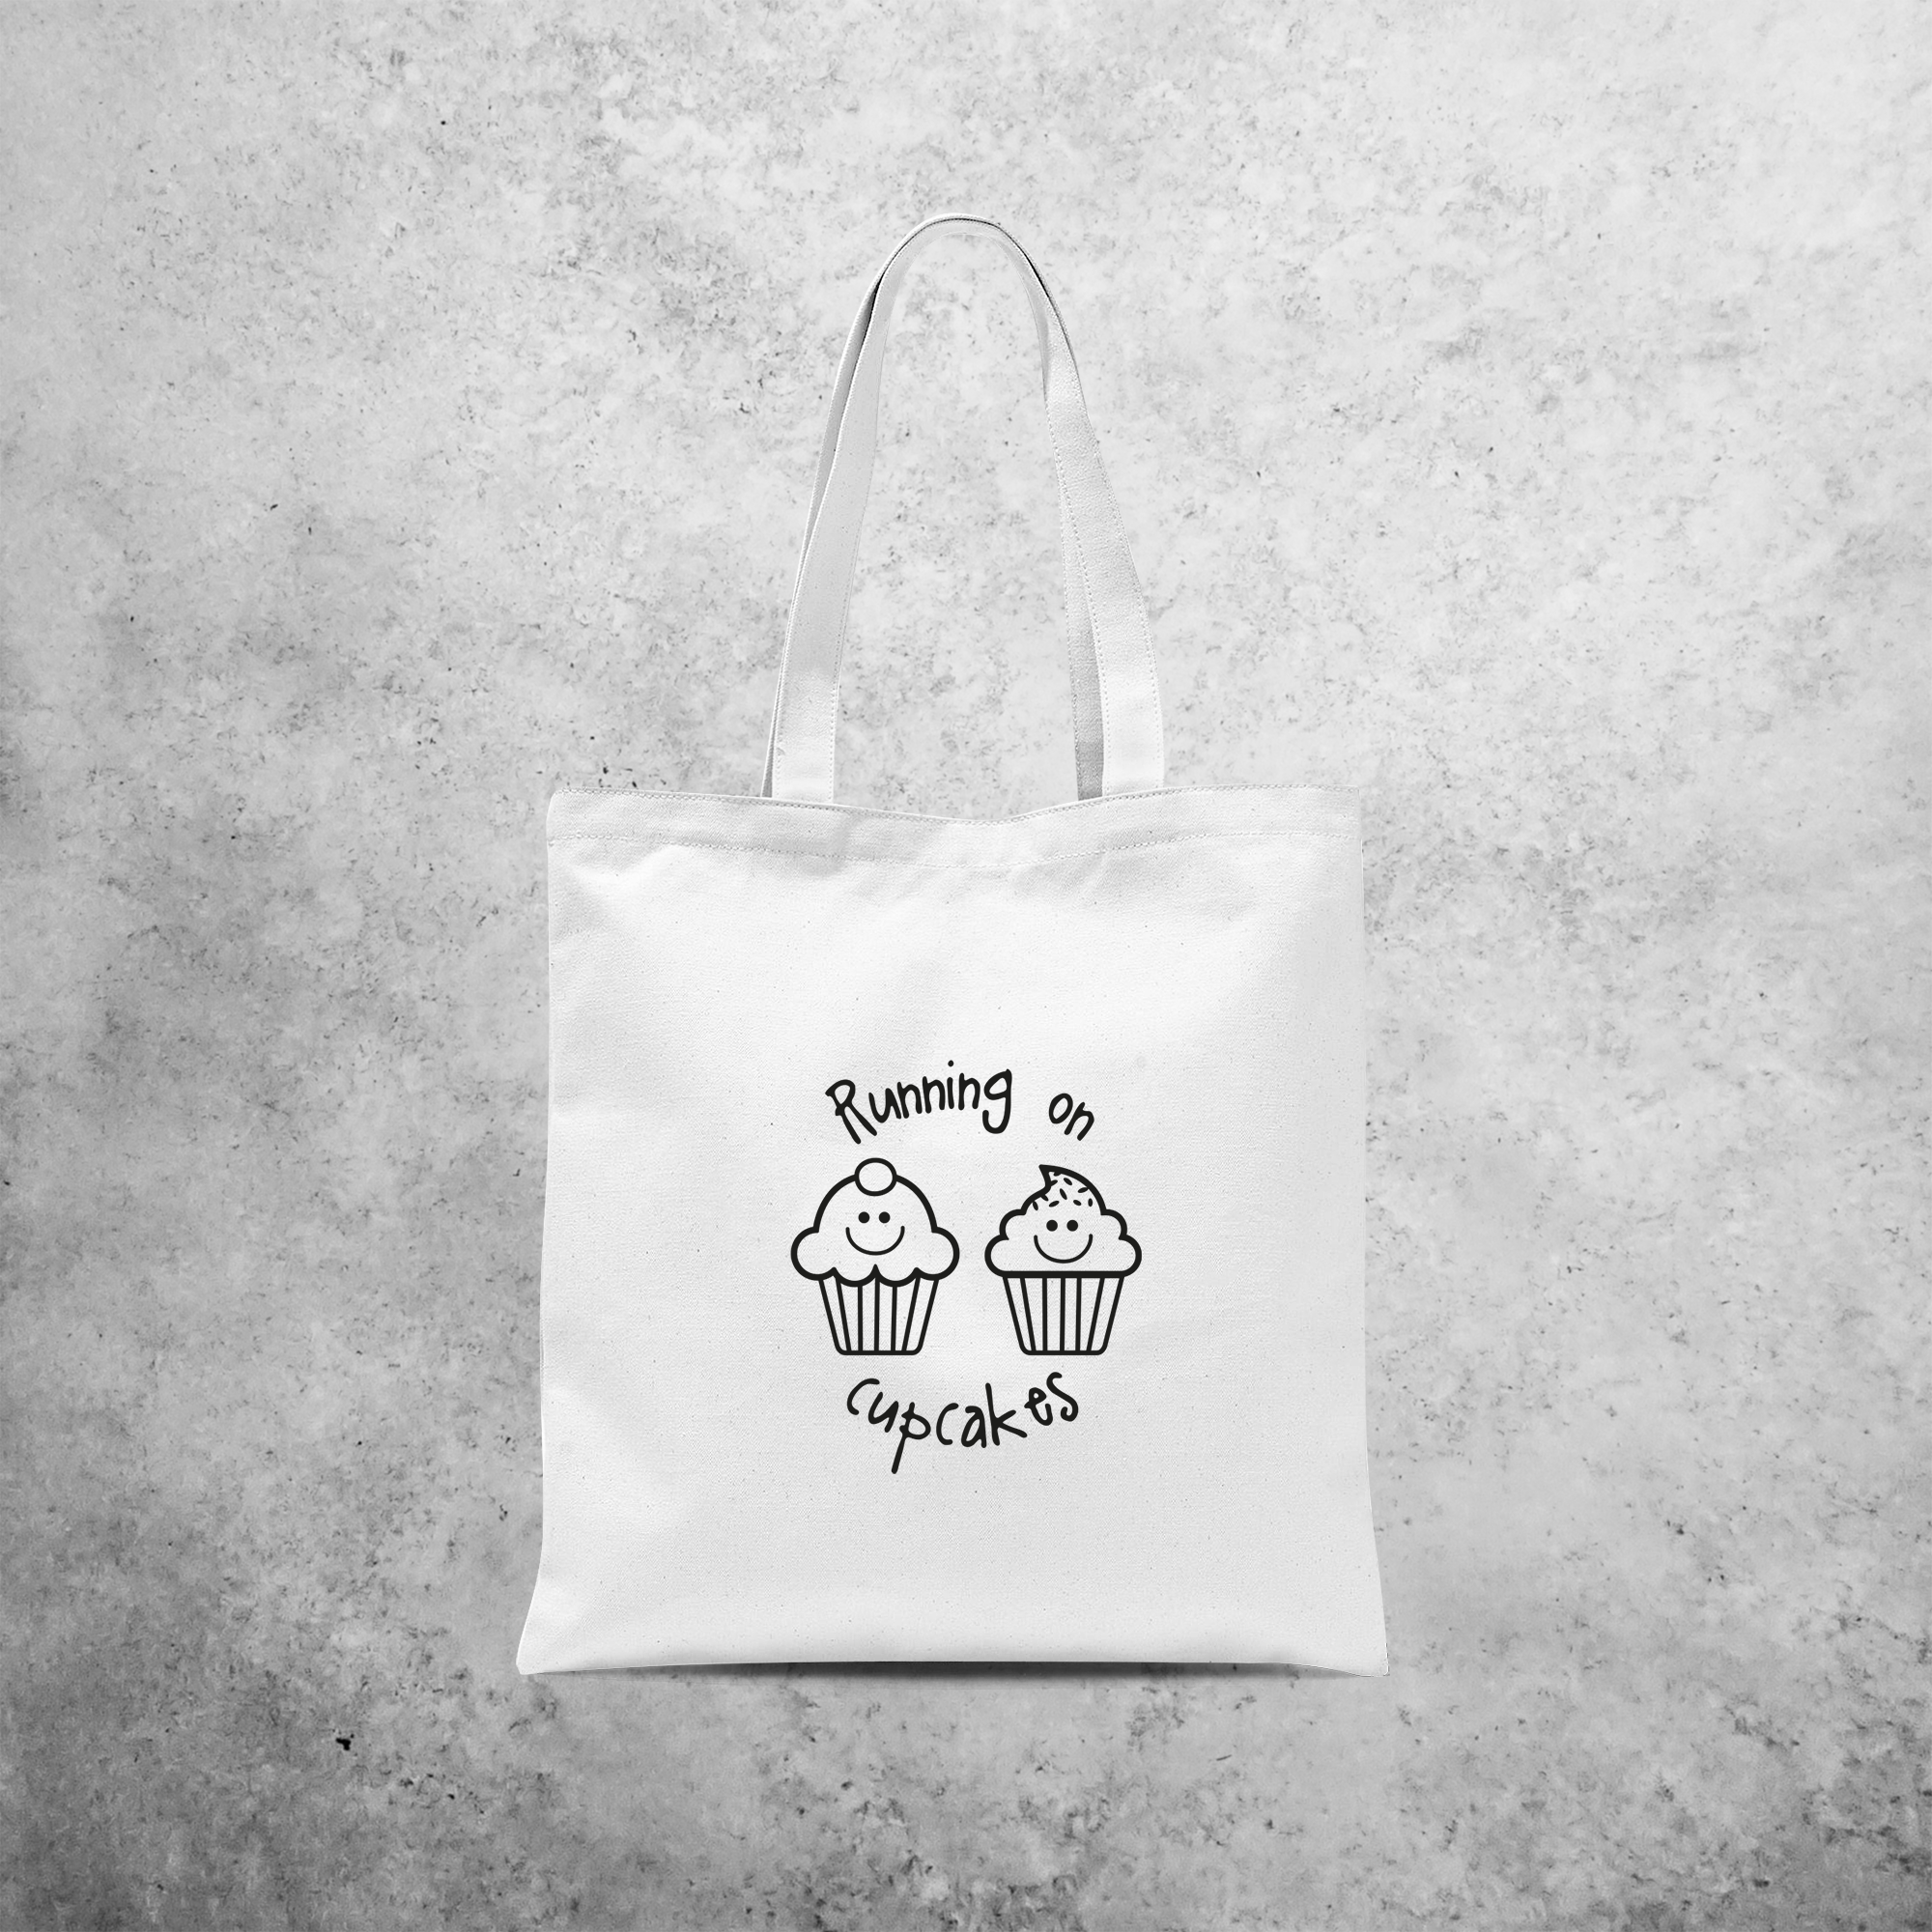 'Running on cupcakes' tote bag